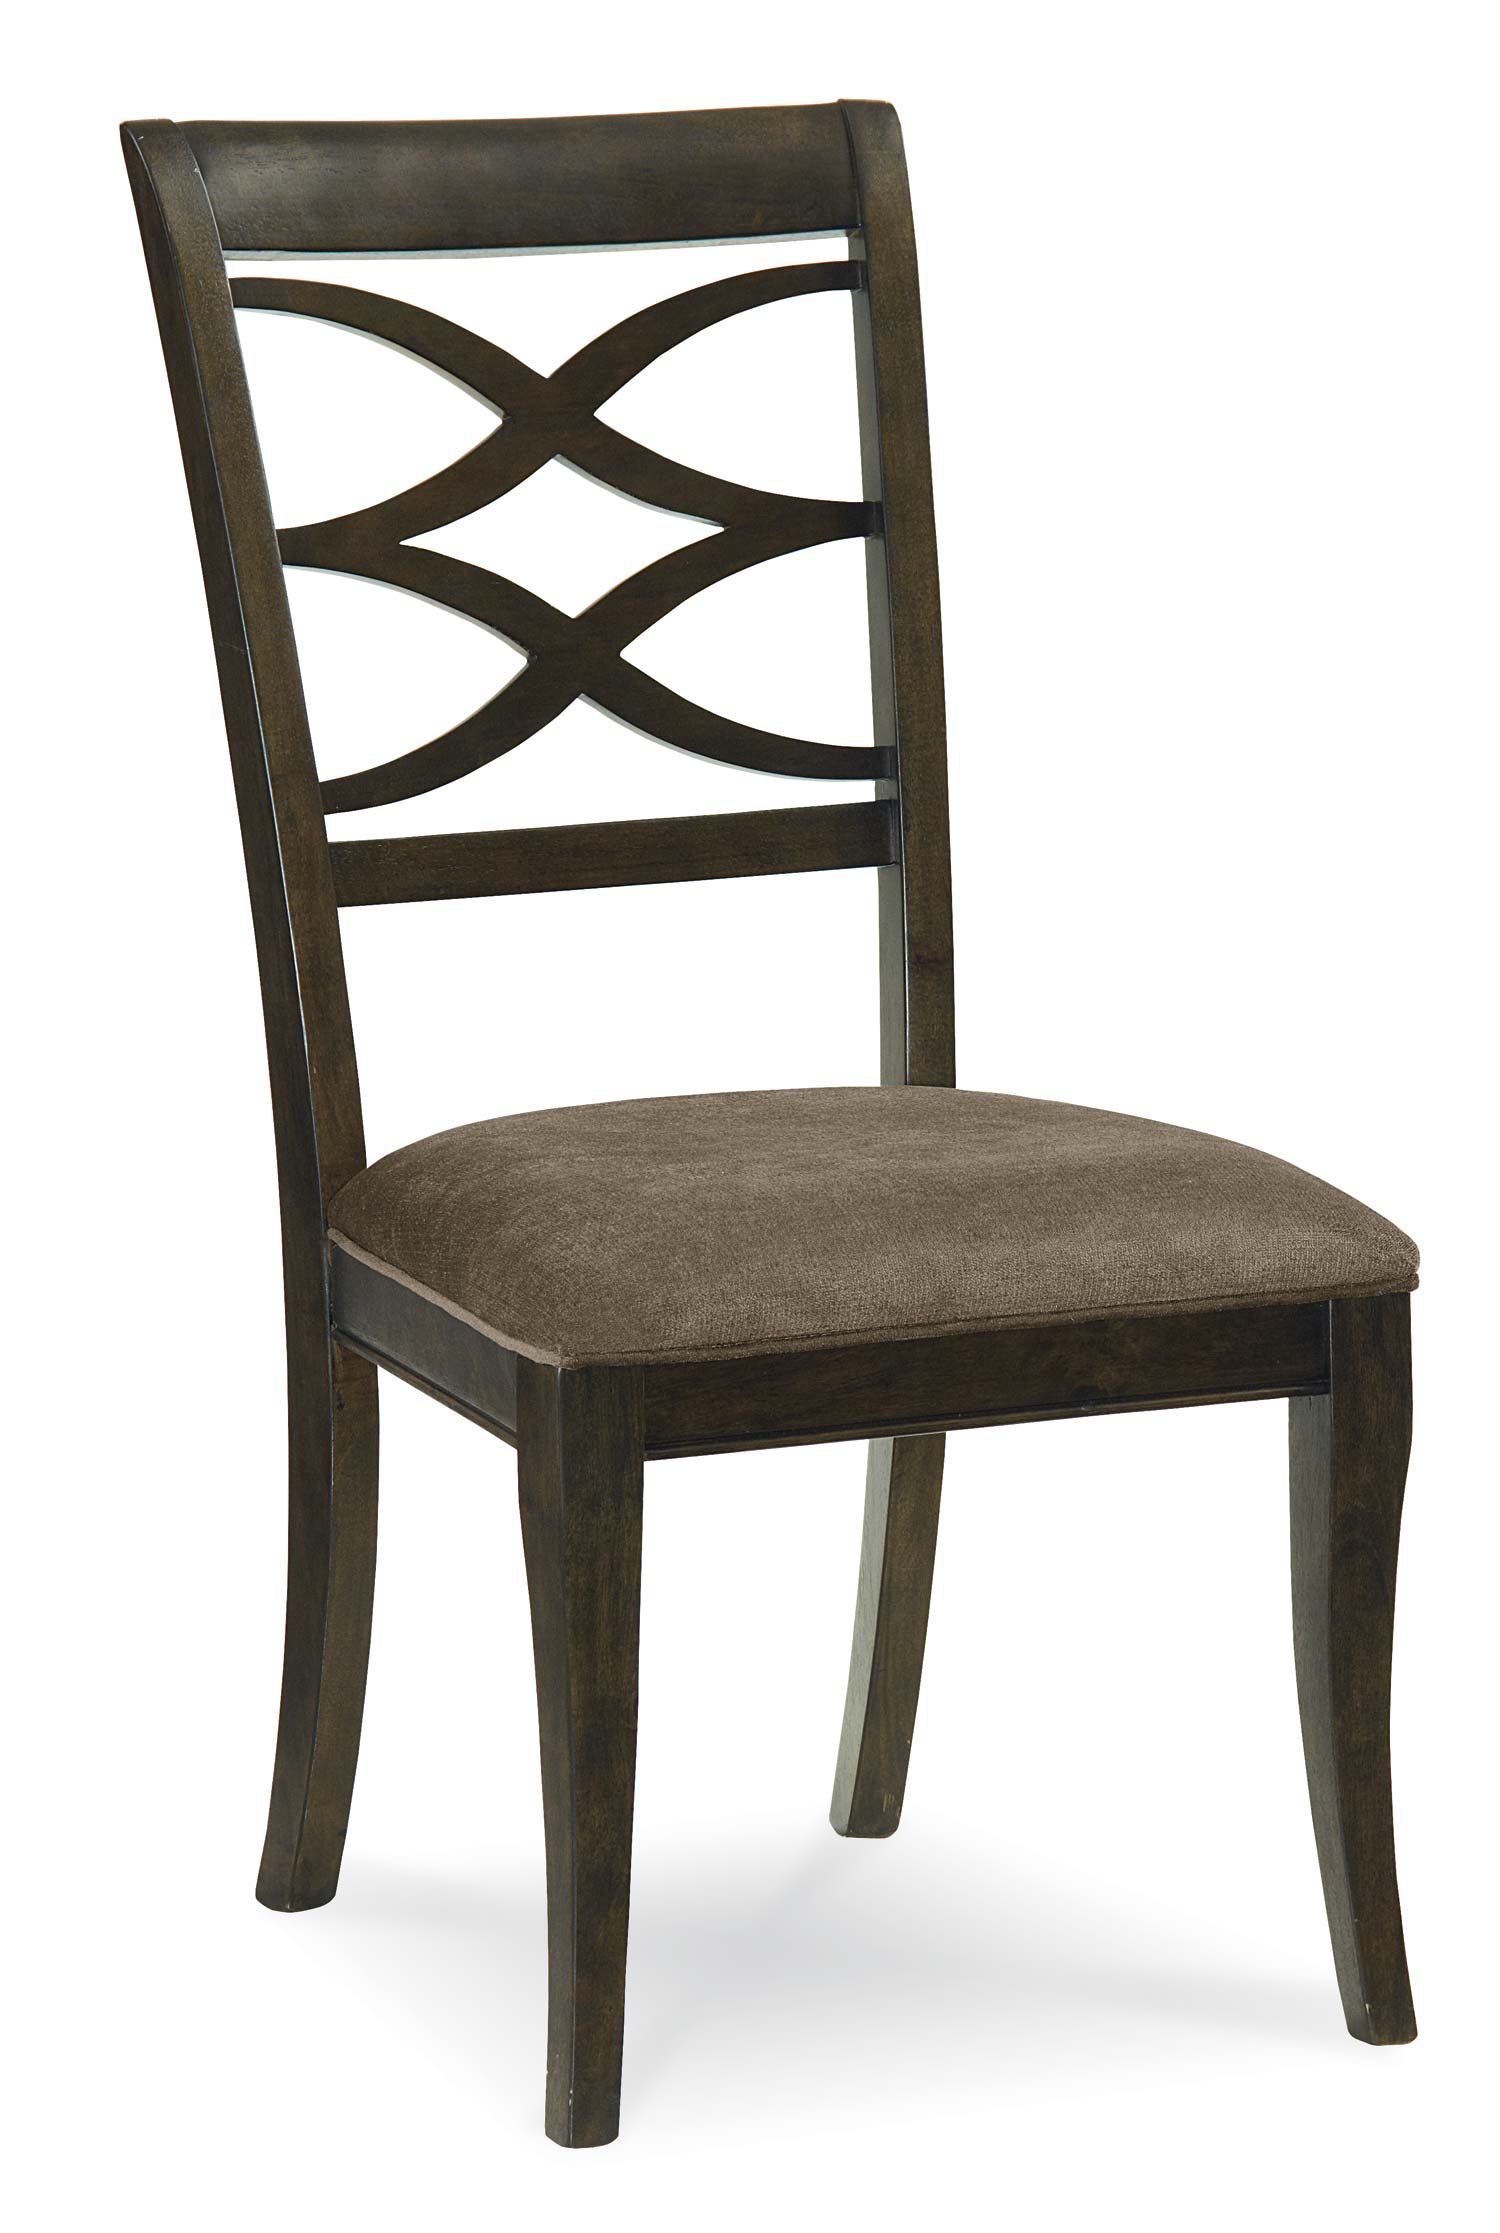 Legacy Classic Westerly Splat Upholstered Back Side Chair - Anthracite/Smokey Heather Accents